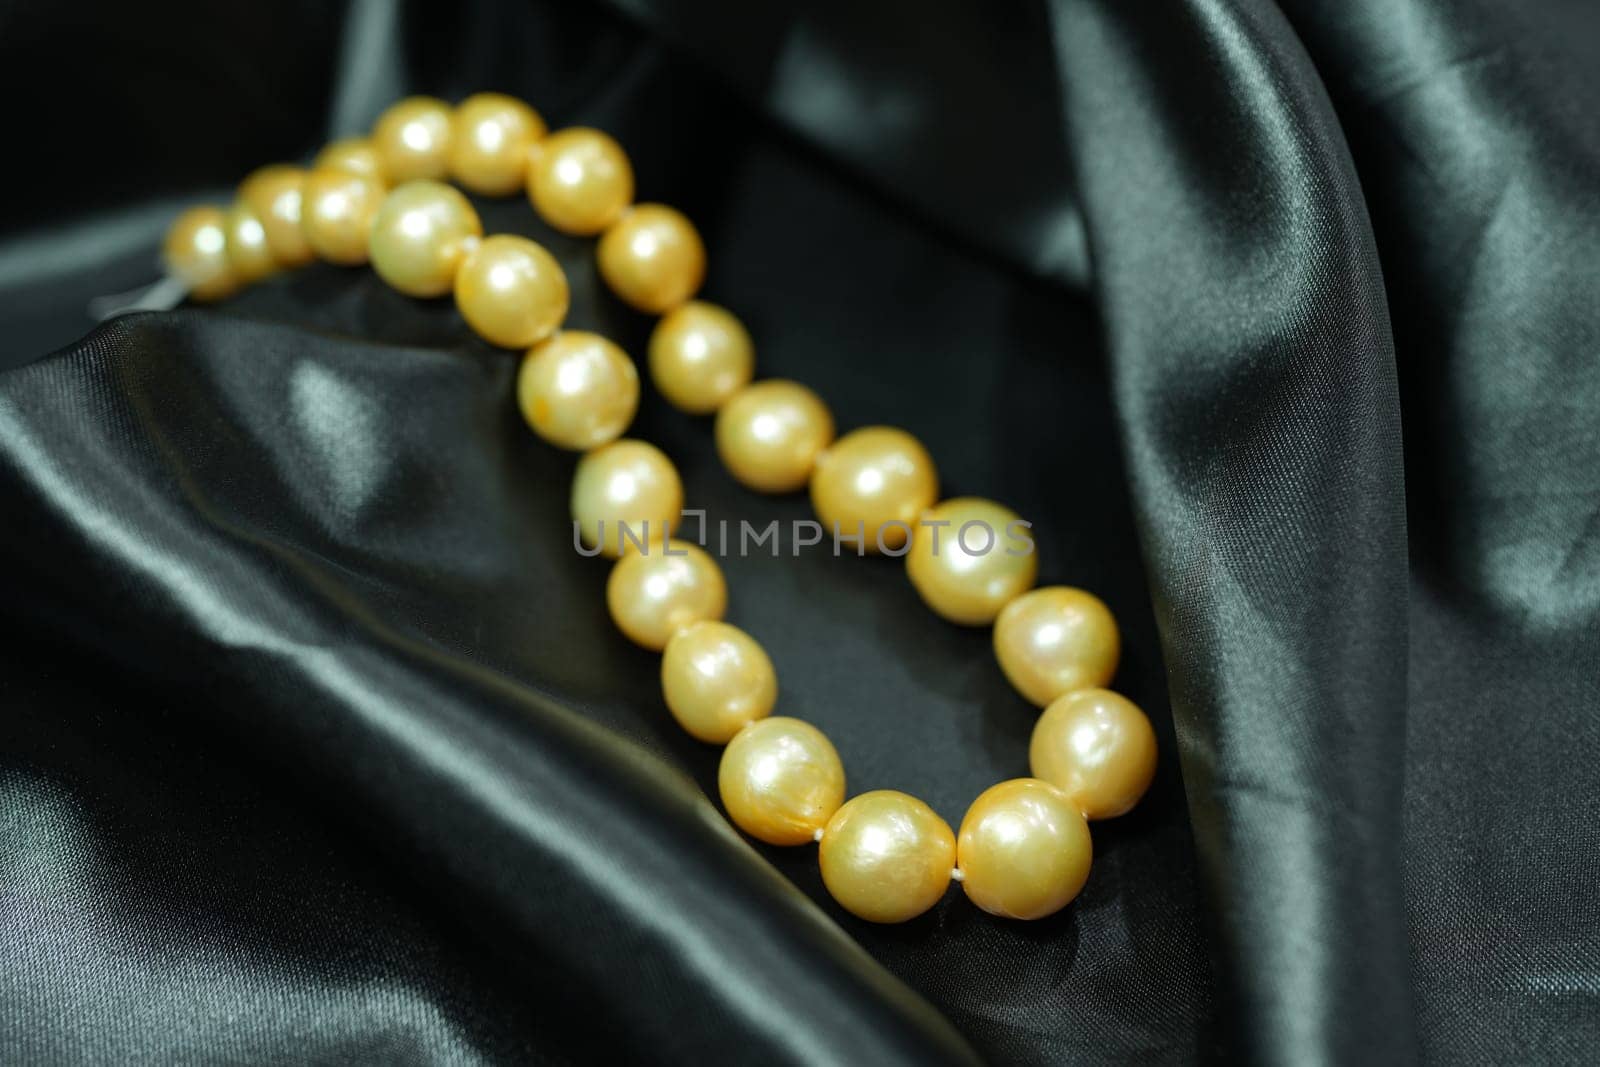 Golden South sea Pearl necklace on black satin background